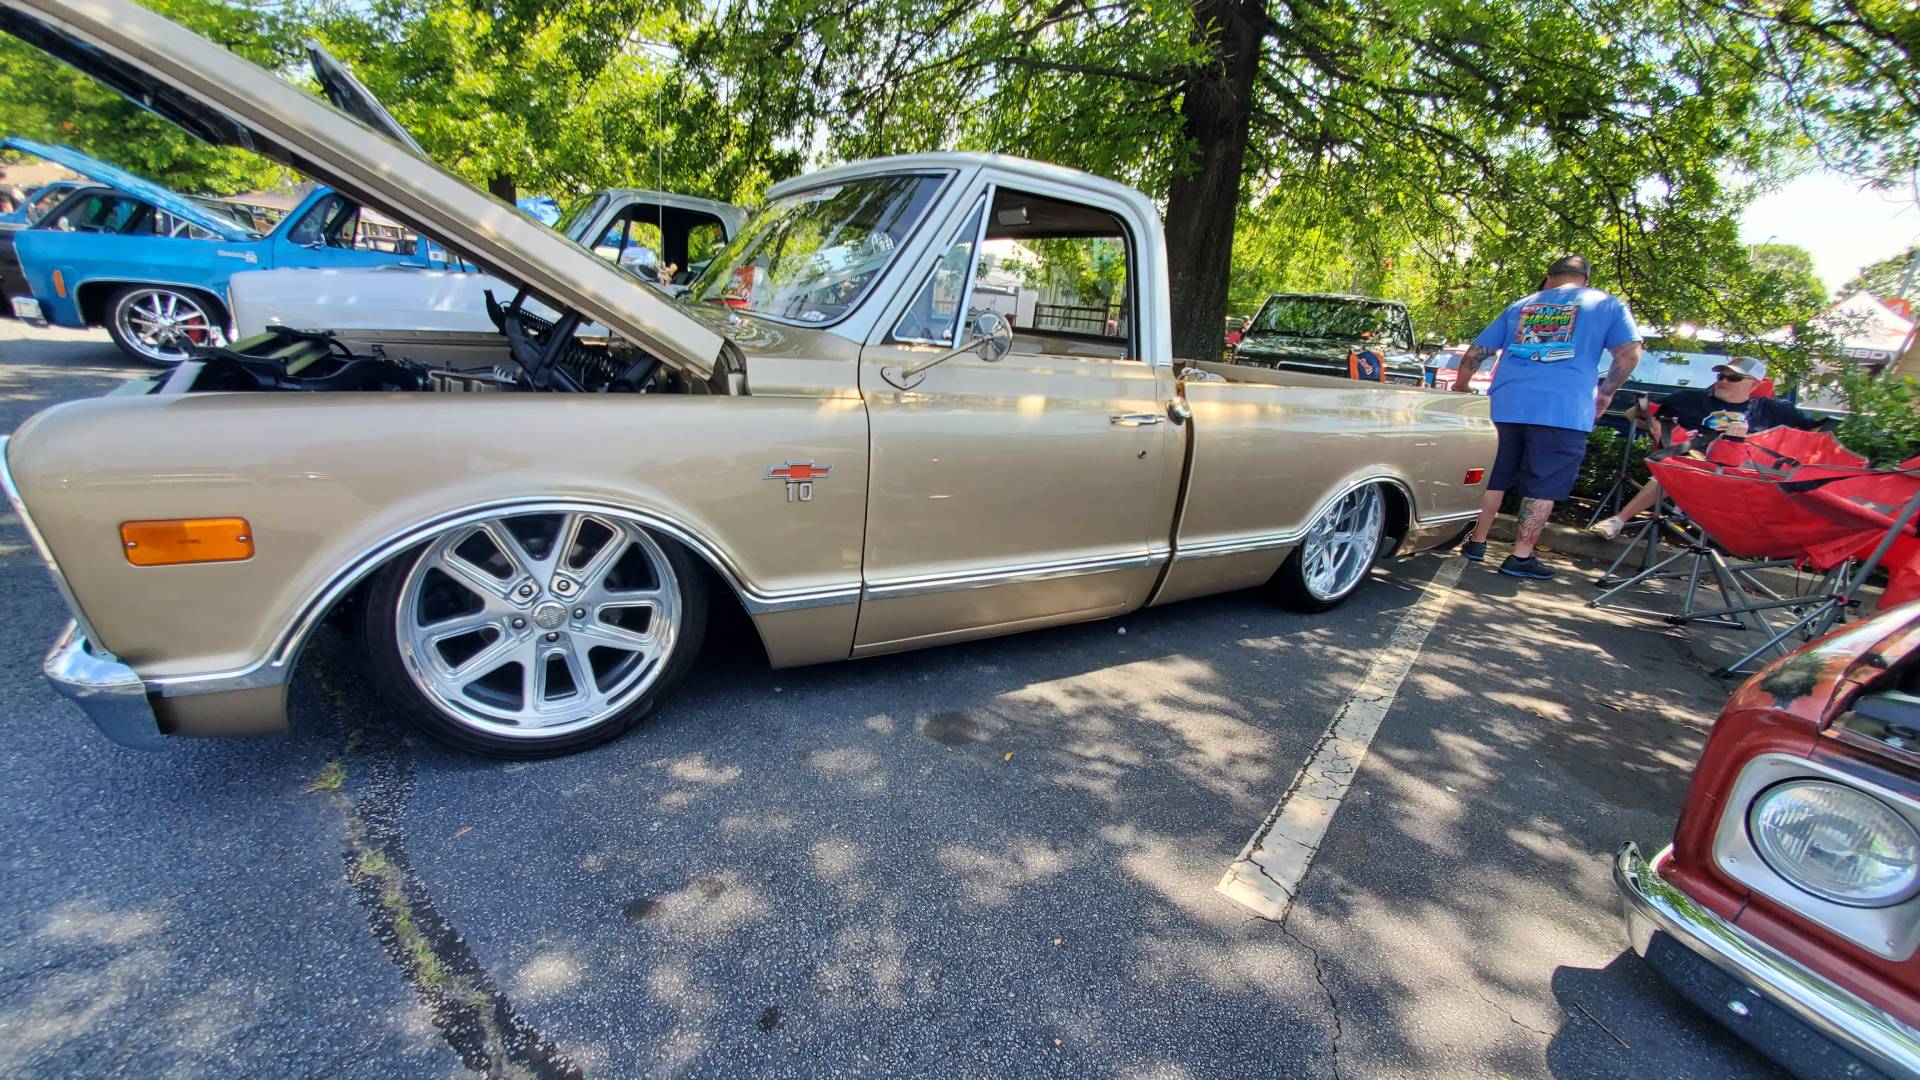 C10s in The Park, TX